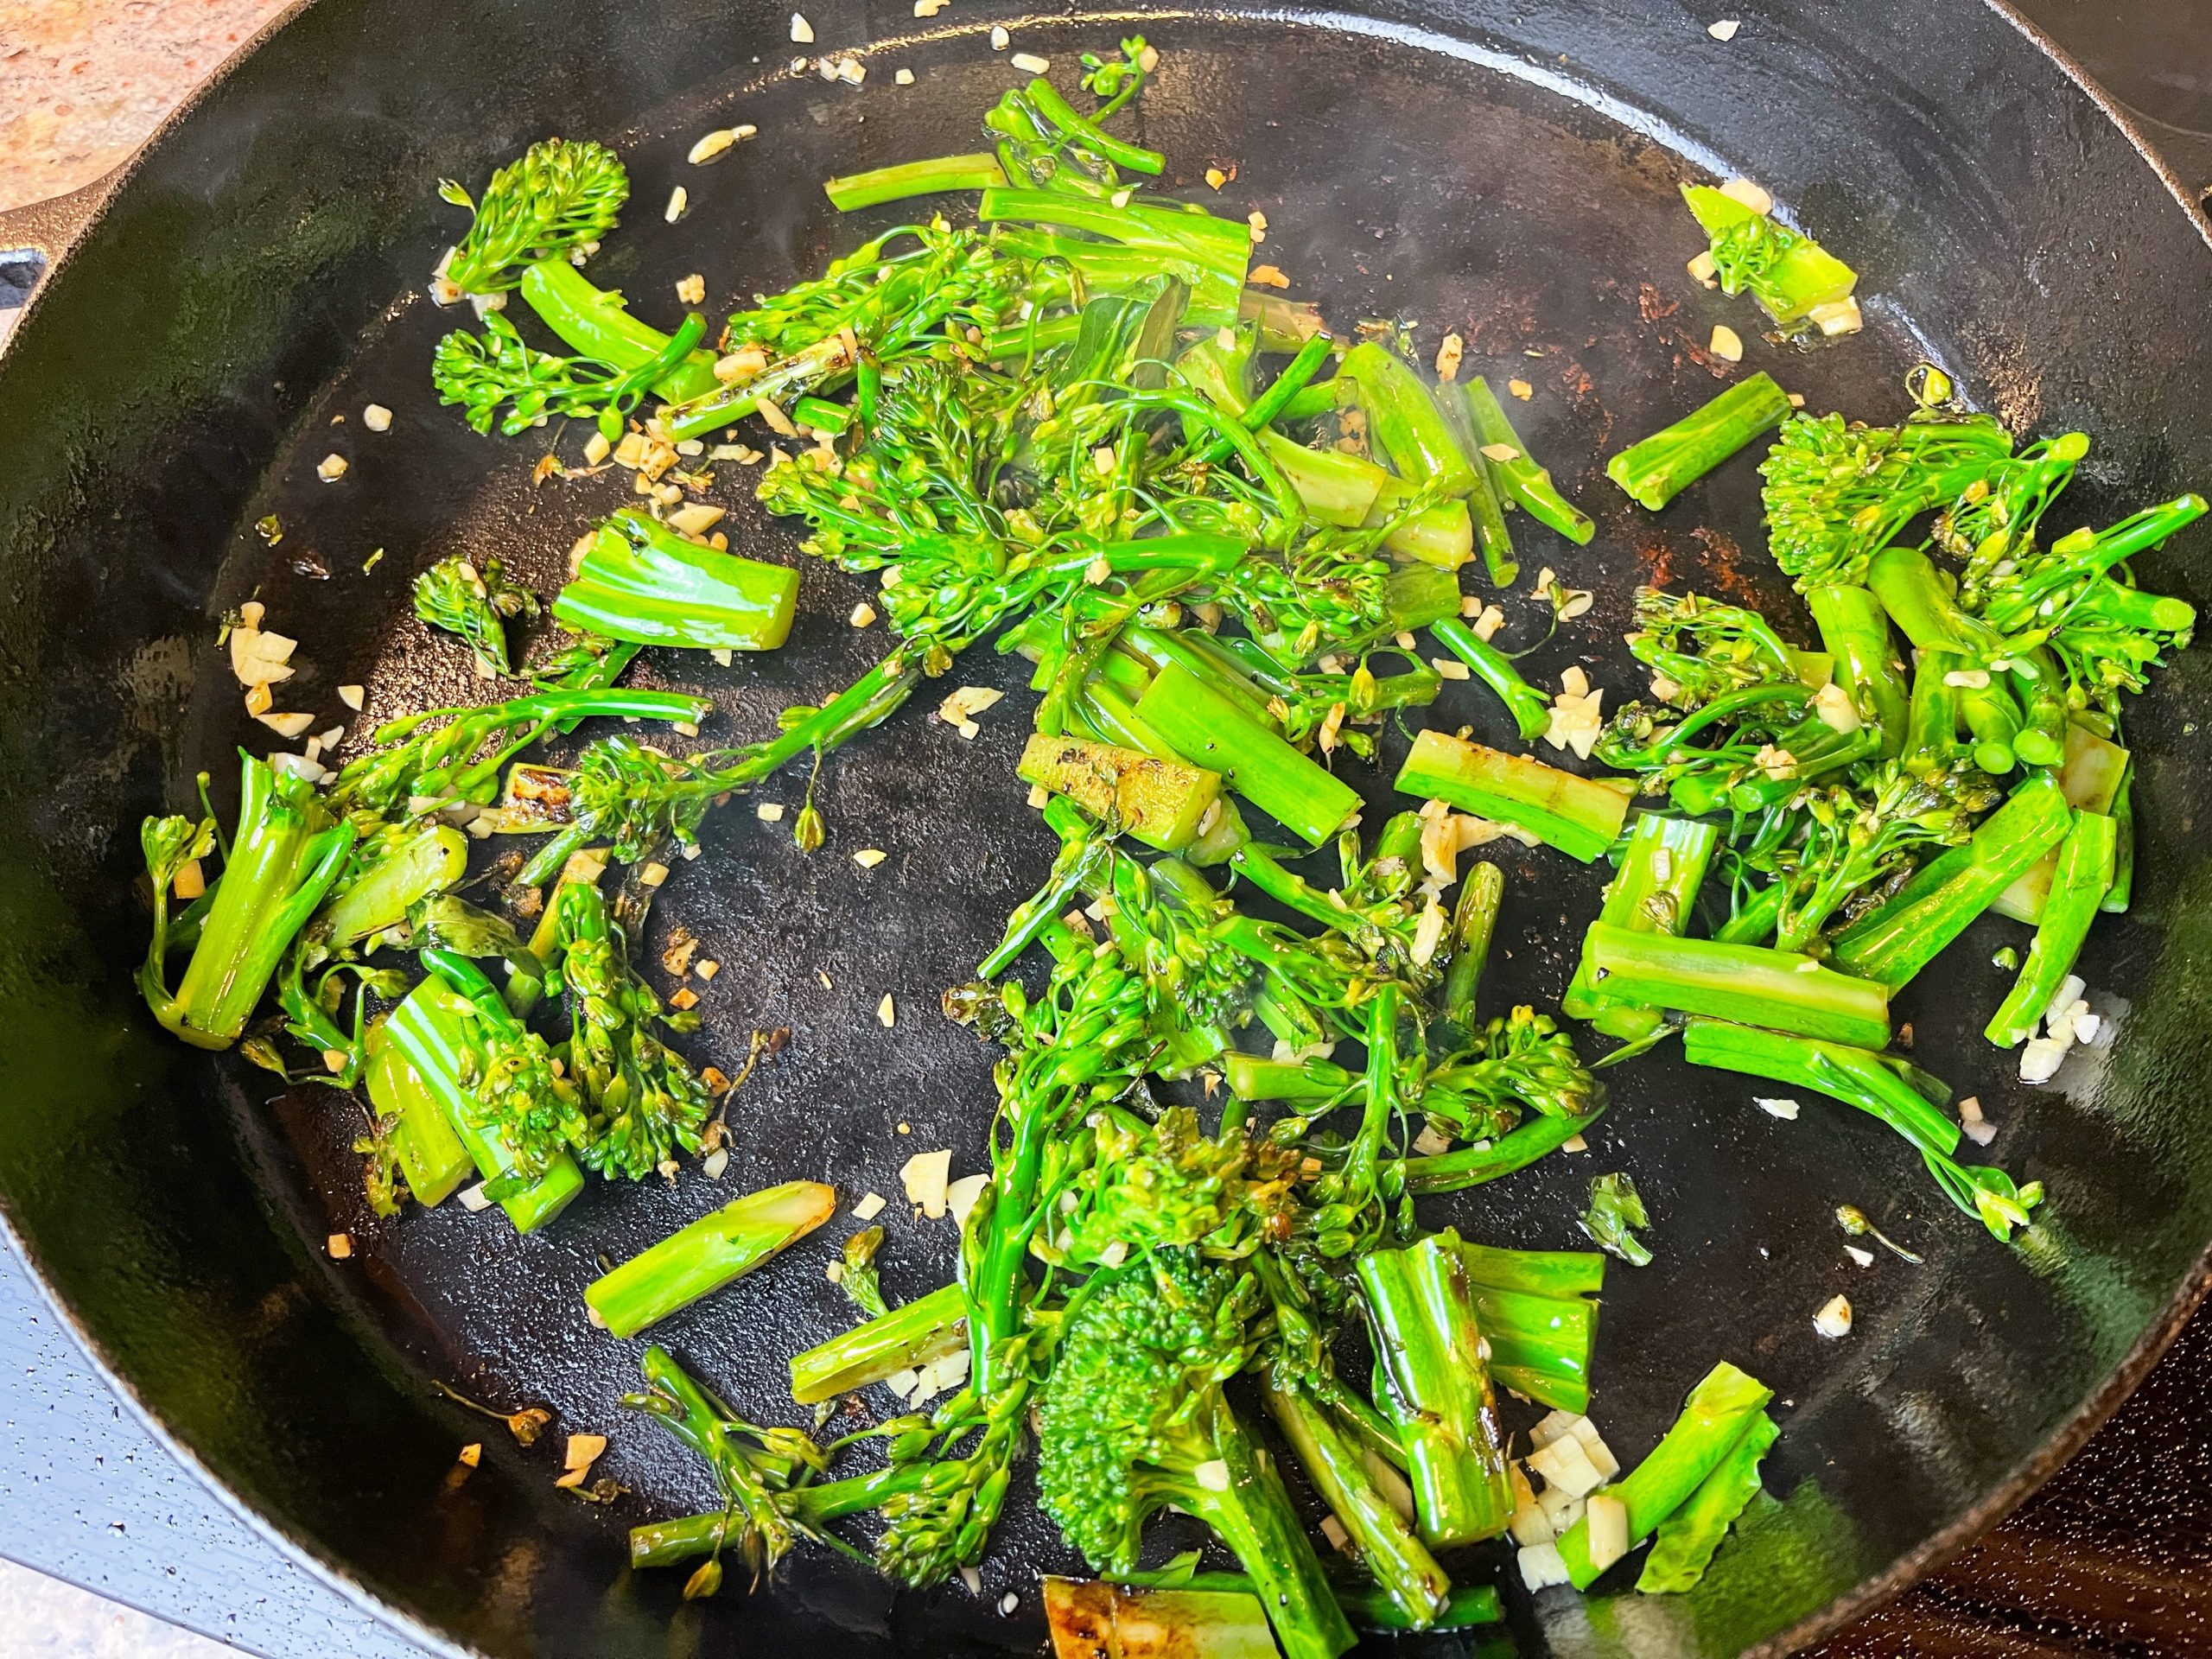 Cook for an additional 3 minutes, until broccolini pieces are browned in spots.